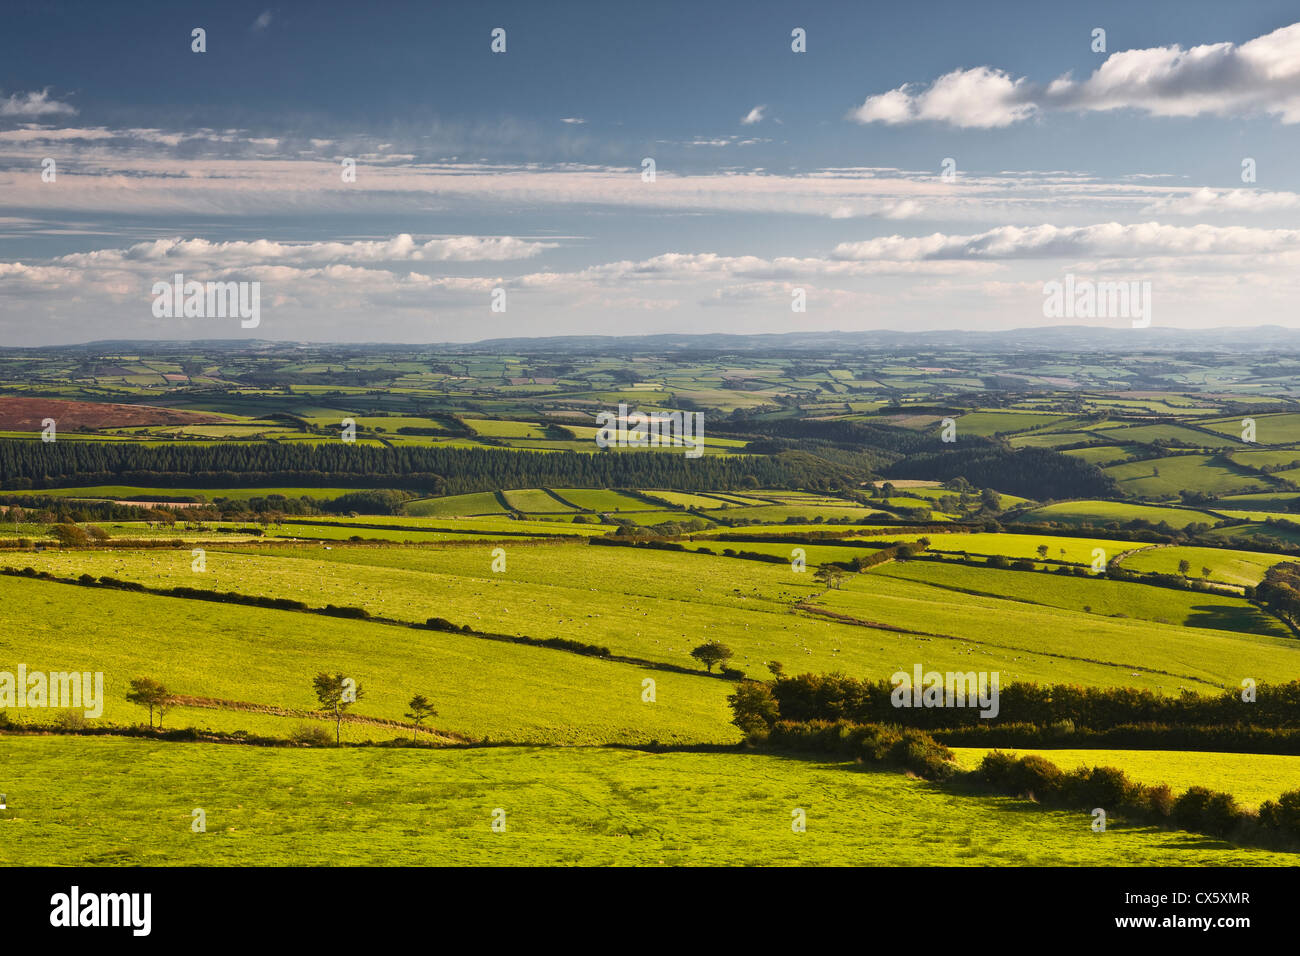 The Exmoor National Park scenery as seen from Kinsford Gate on the Devonshire border. Stock Photo